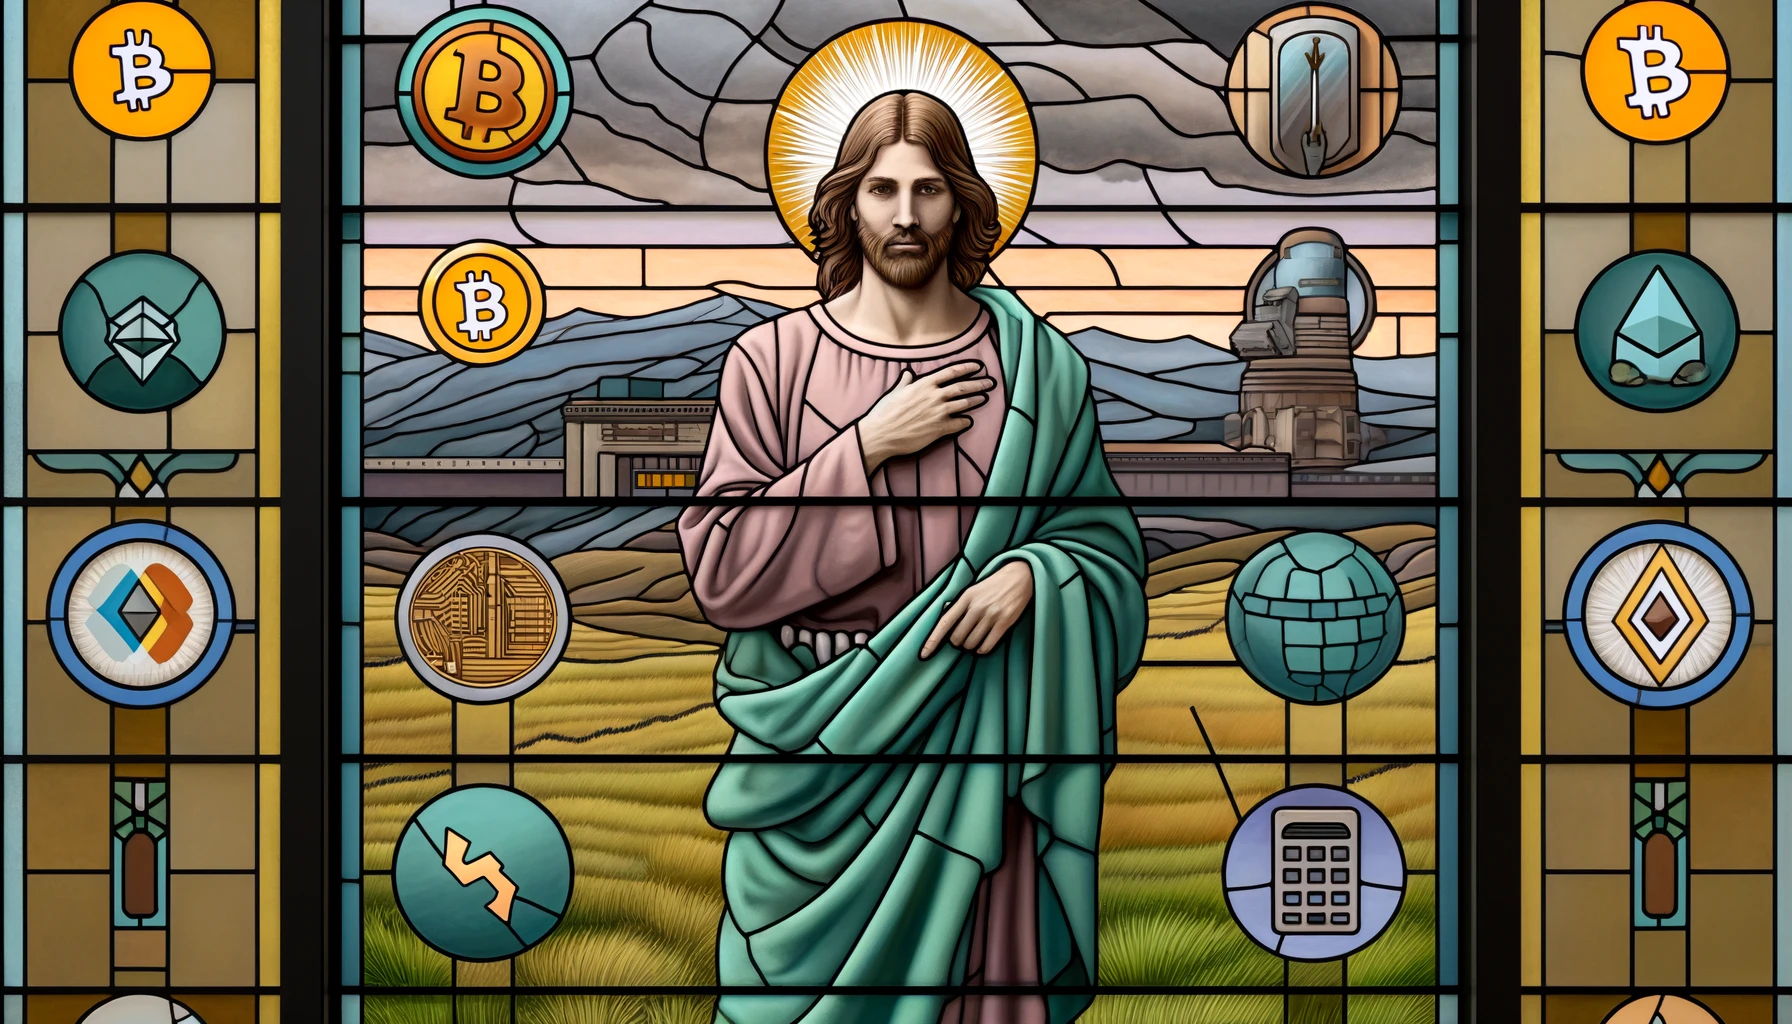 The arrest of Roger 'Bitcoin Jesus' Ver has sparked fears of a crypto war led by President Biden (Image: Machine.news)